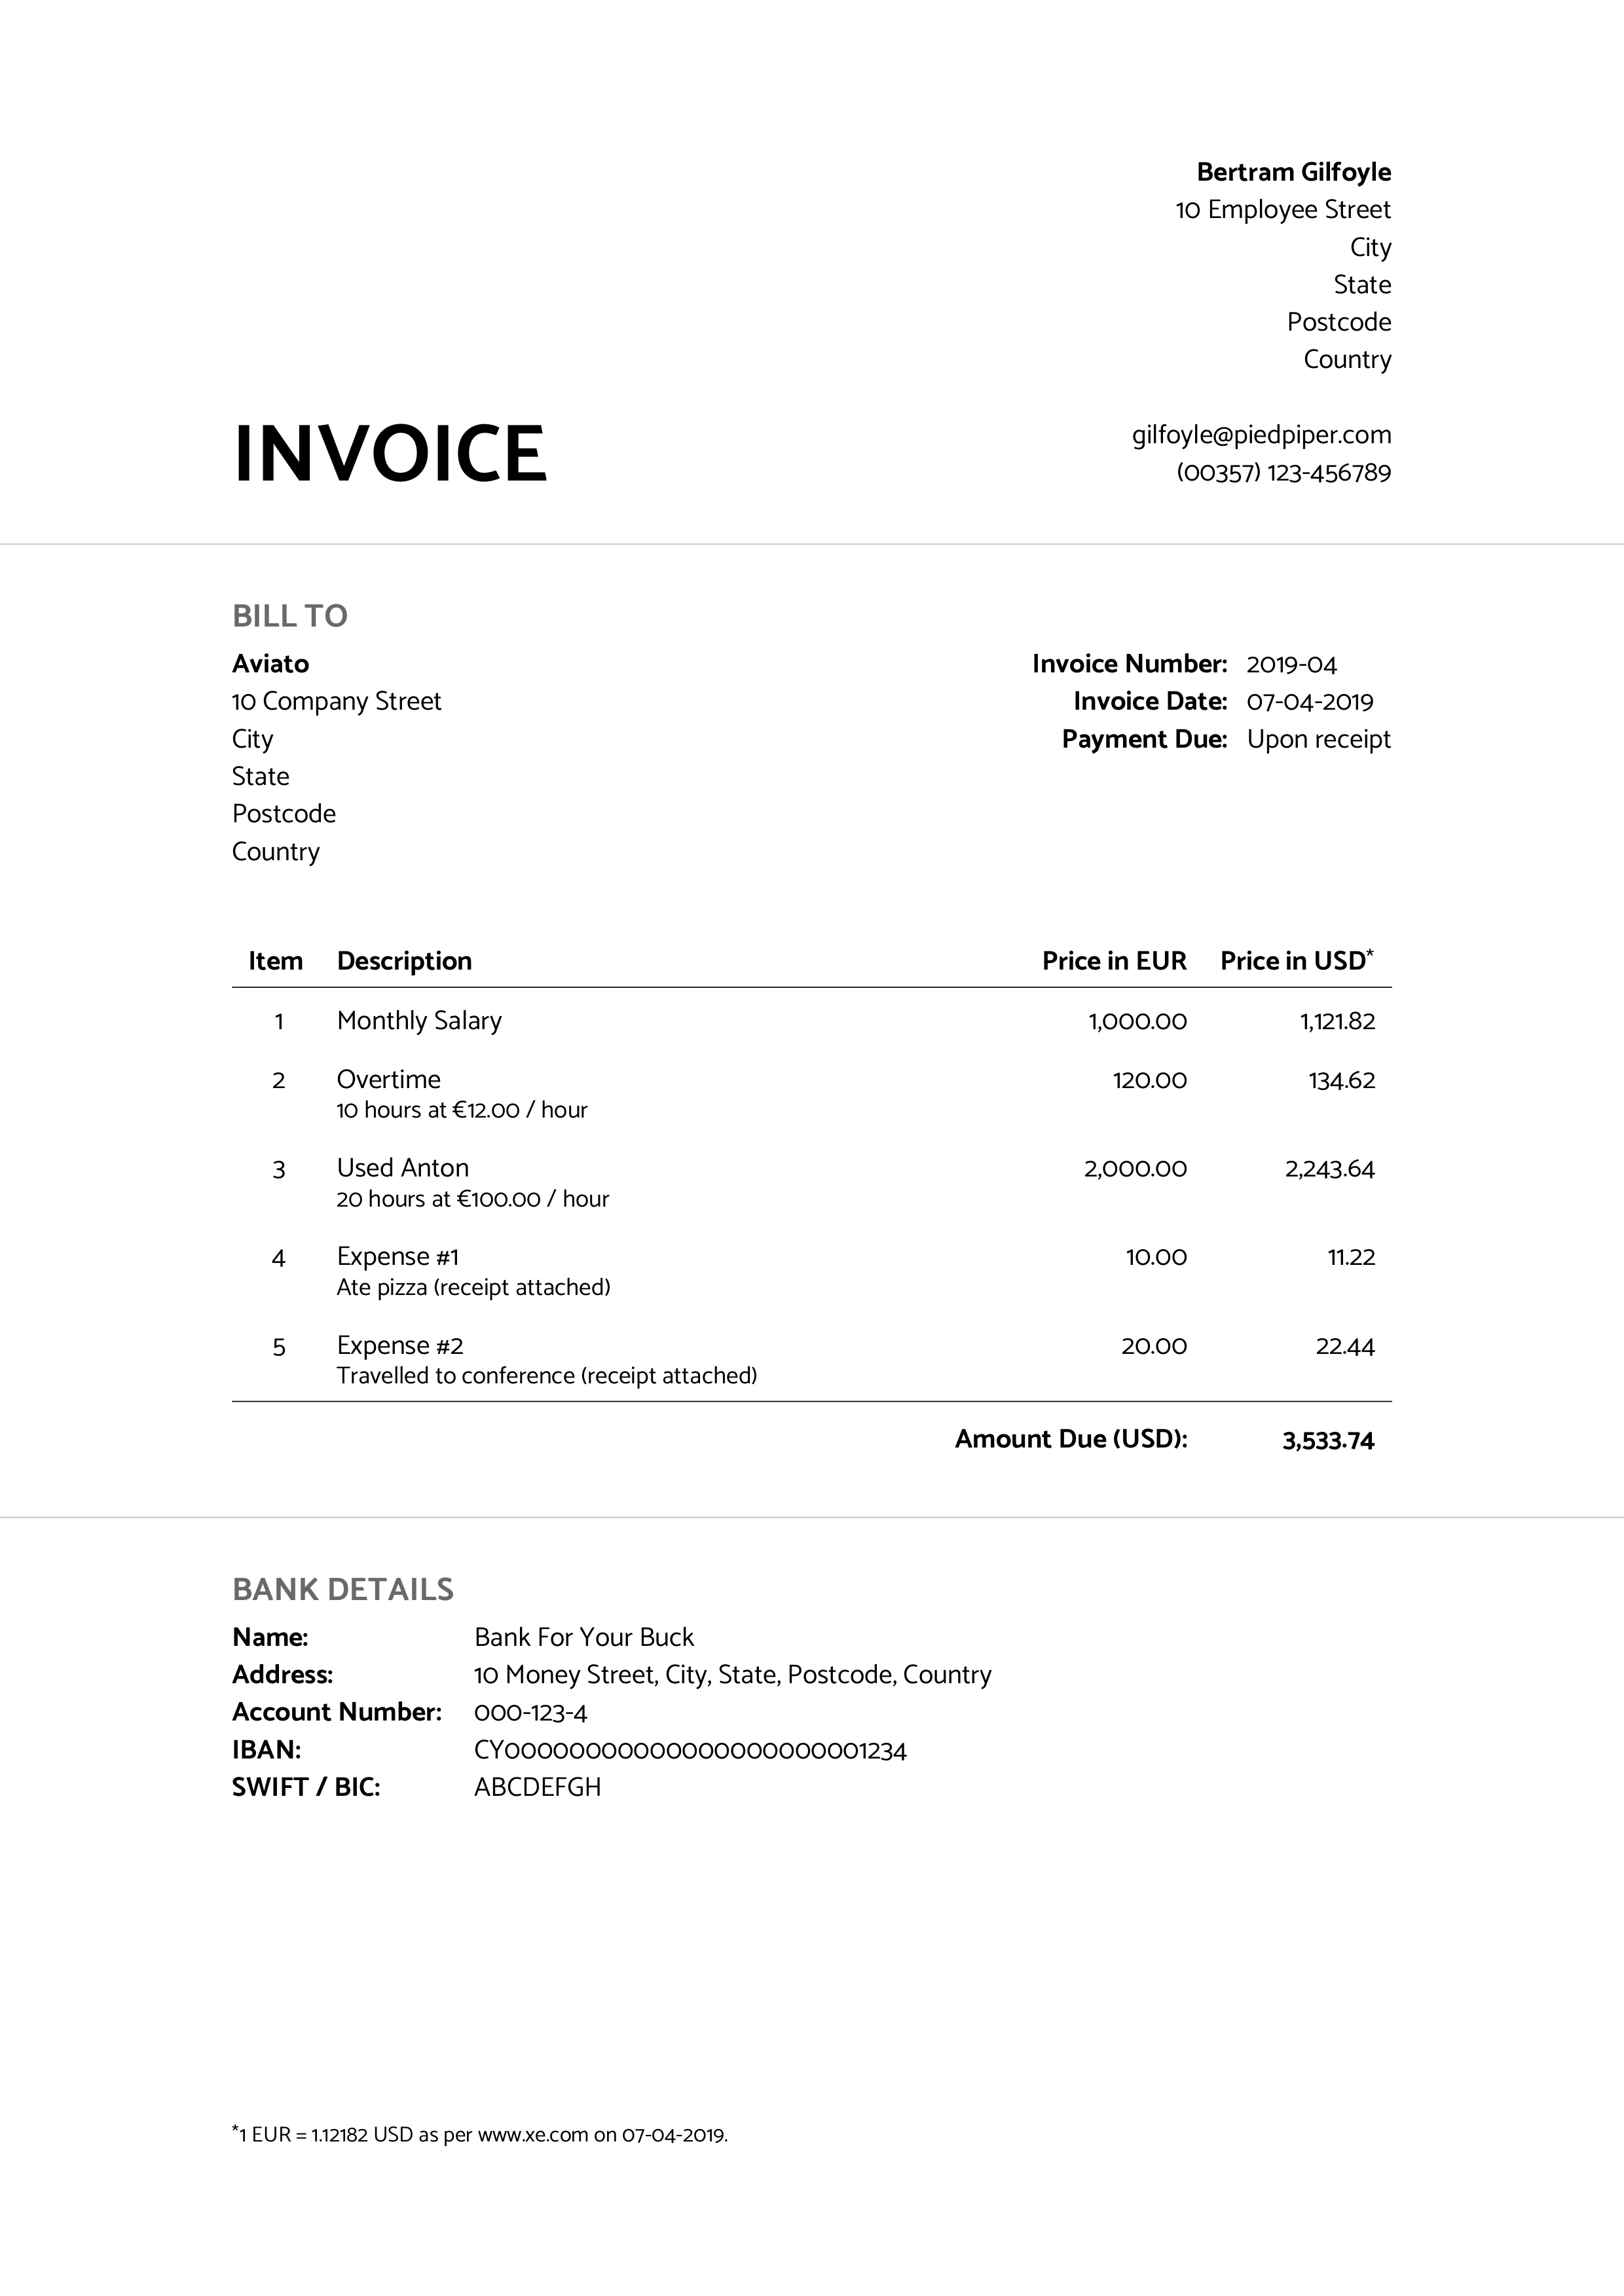 Example invoice using the Catamaran font and EUR-USD currency conversion